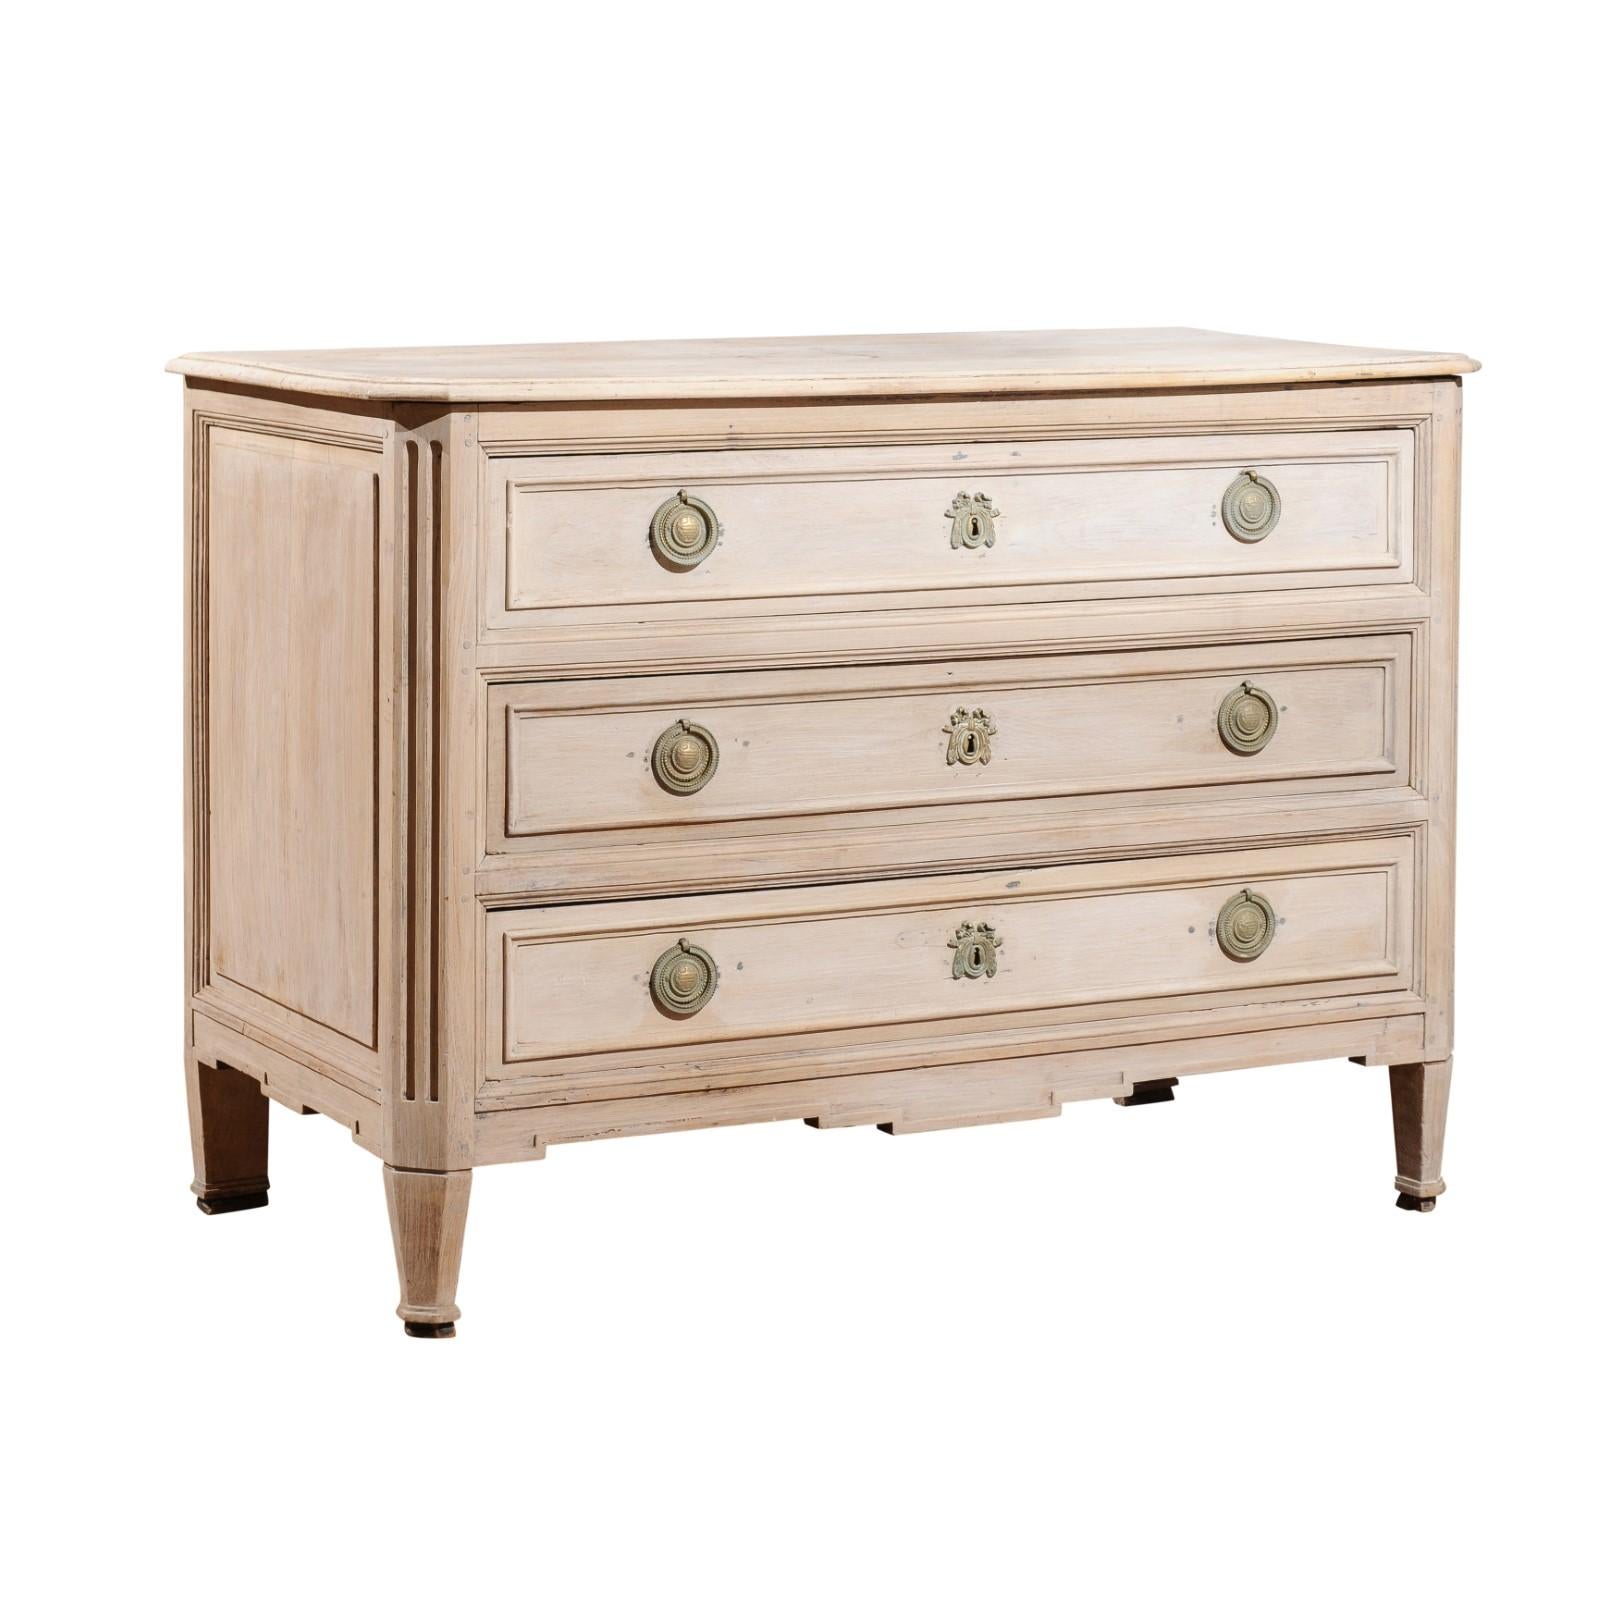 French 1790s Louis XVI Three-Drawer Commode with Faded White Patina and Fluting